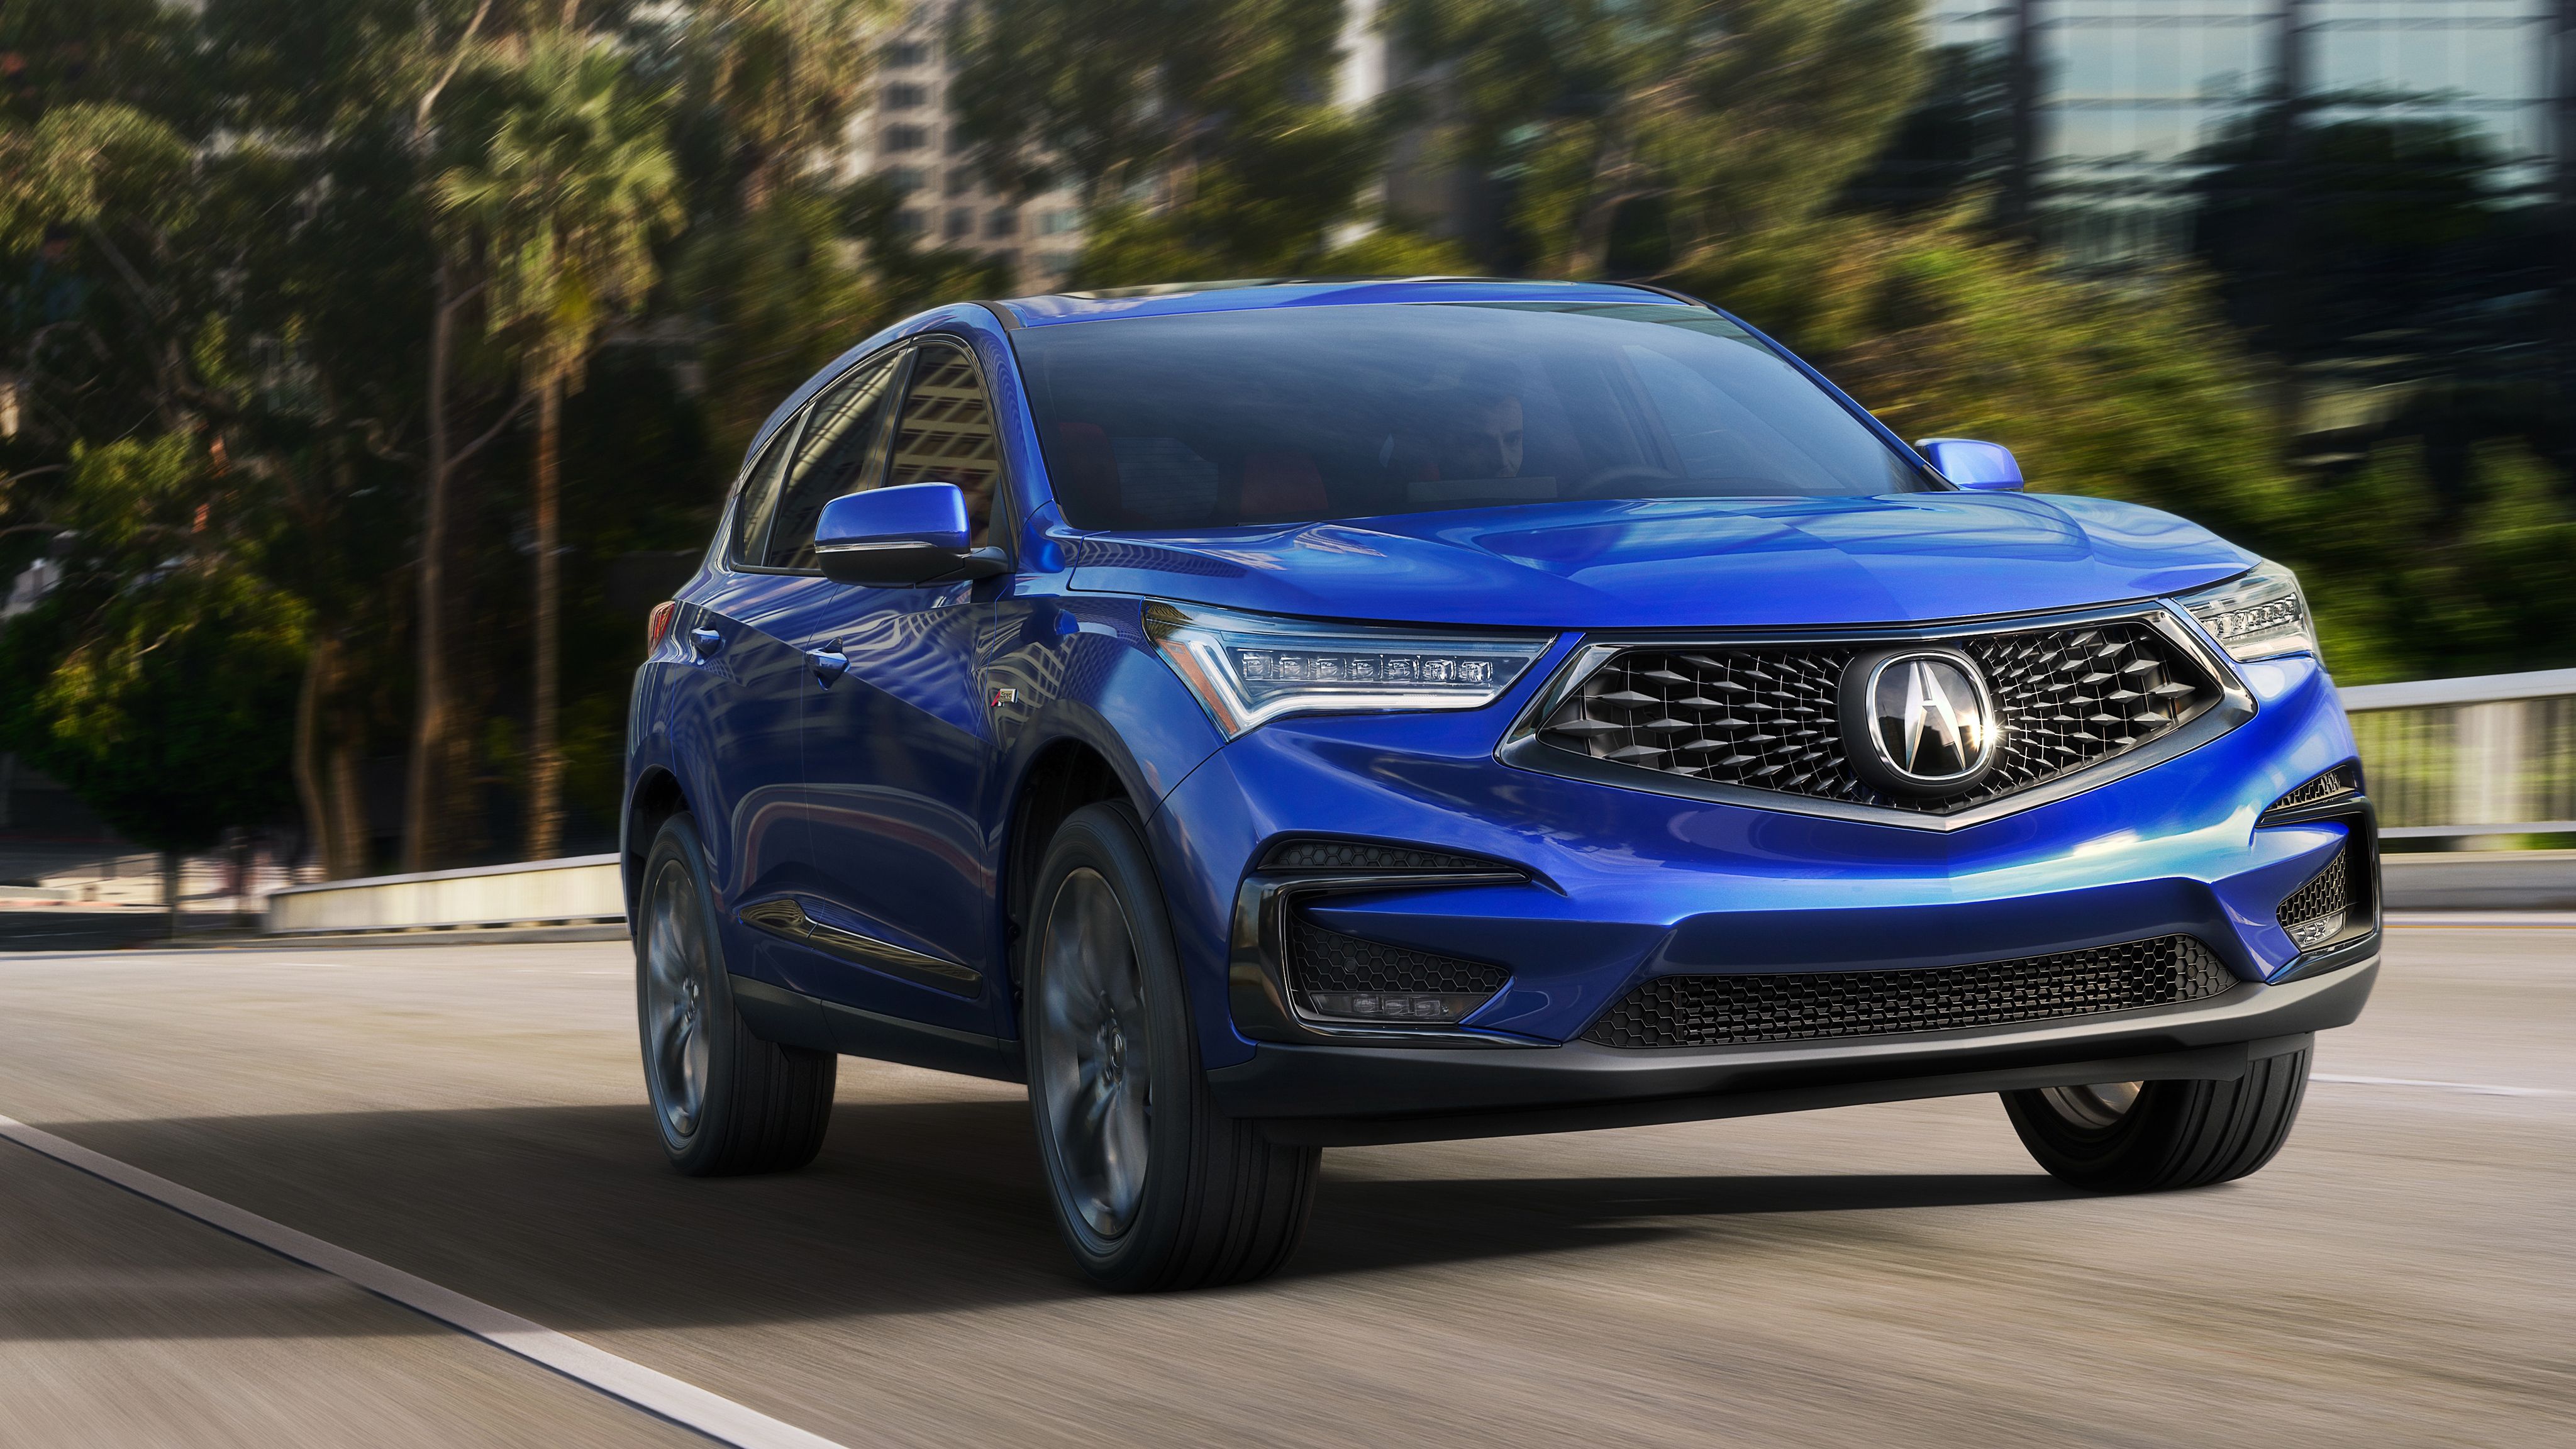 Download wallpapers Acura RDX, 2019, A-Spec, 4k, exterior, front view,  luxury sport SUV, new blue RDX, Japanese cars for desktop free. Pictures  for desktop free